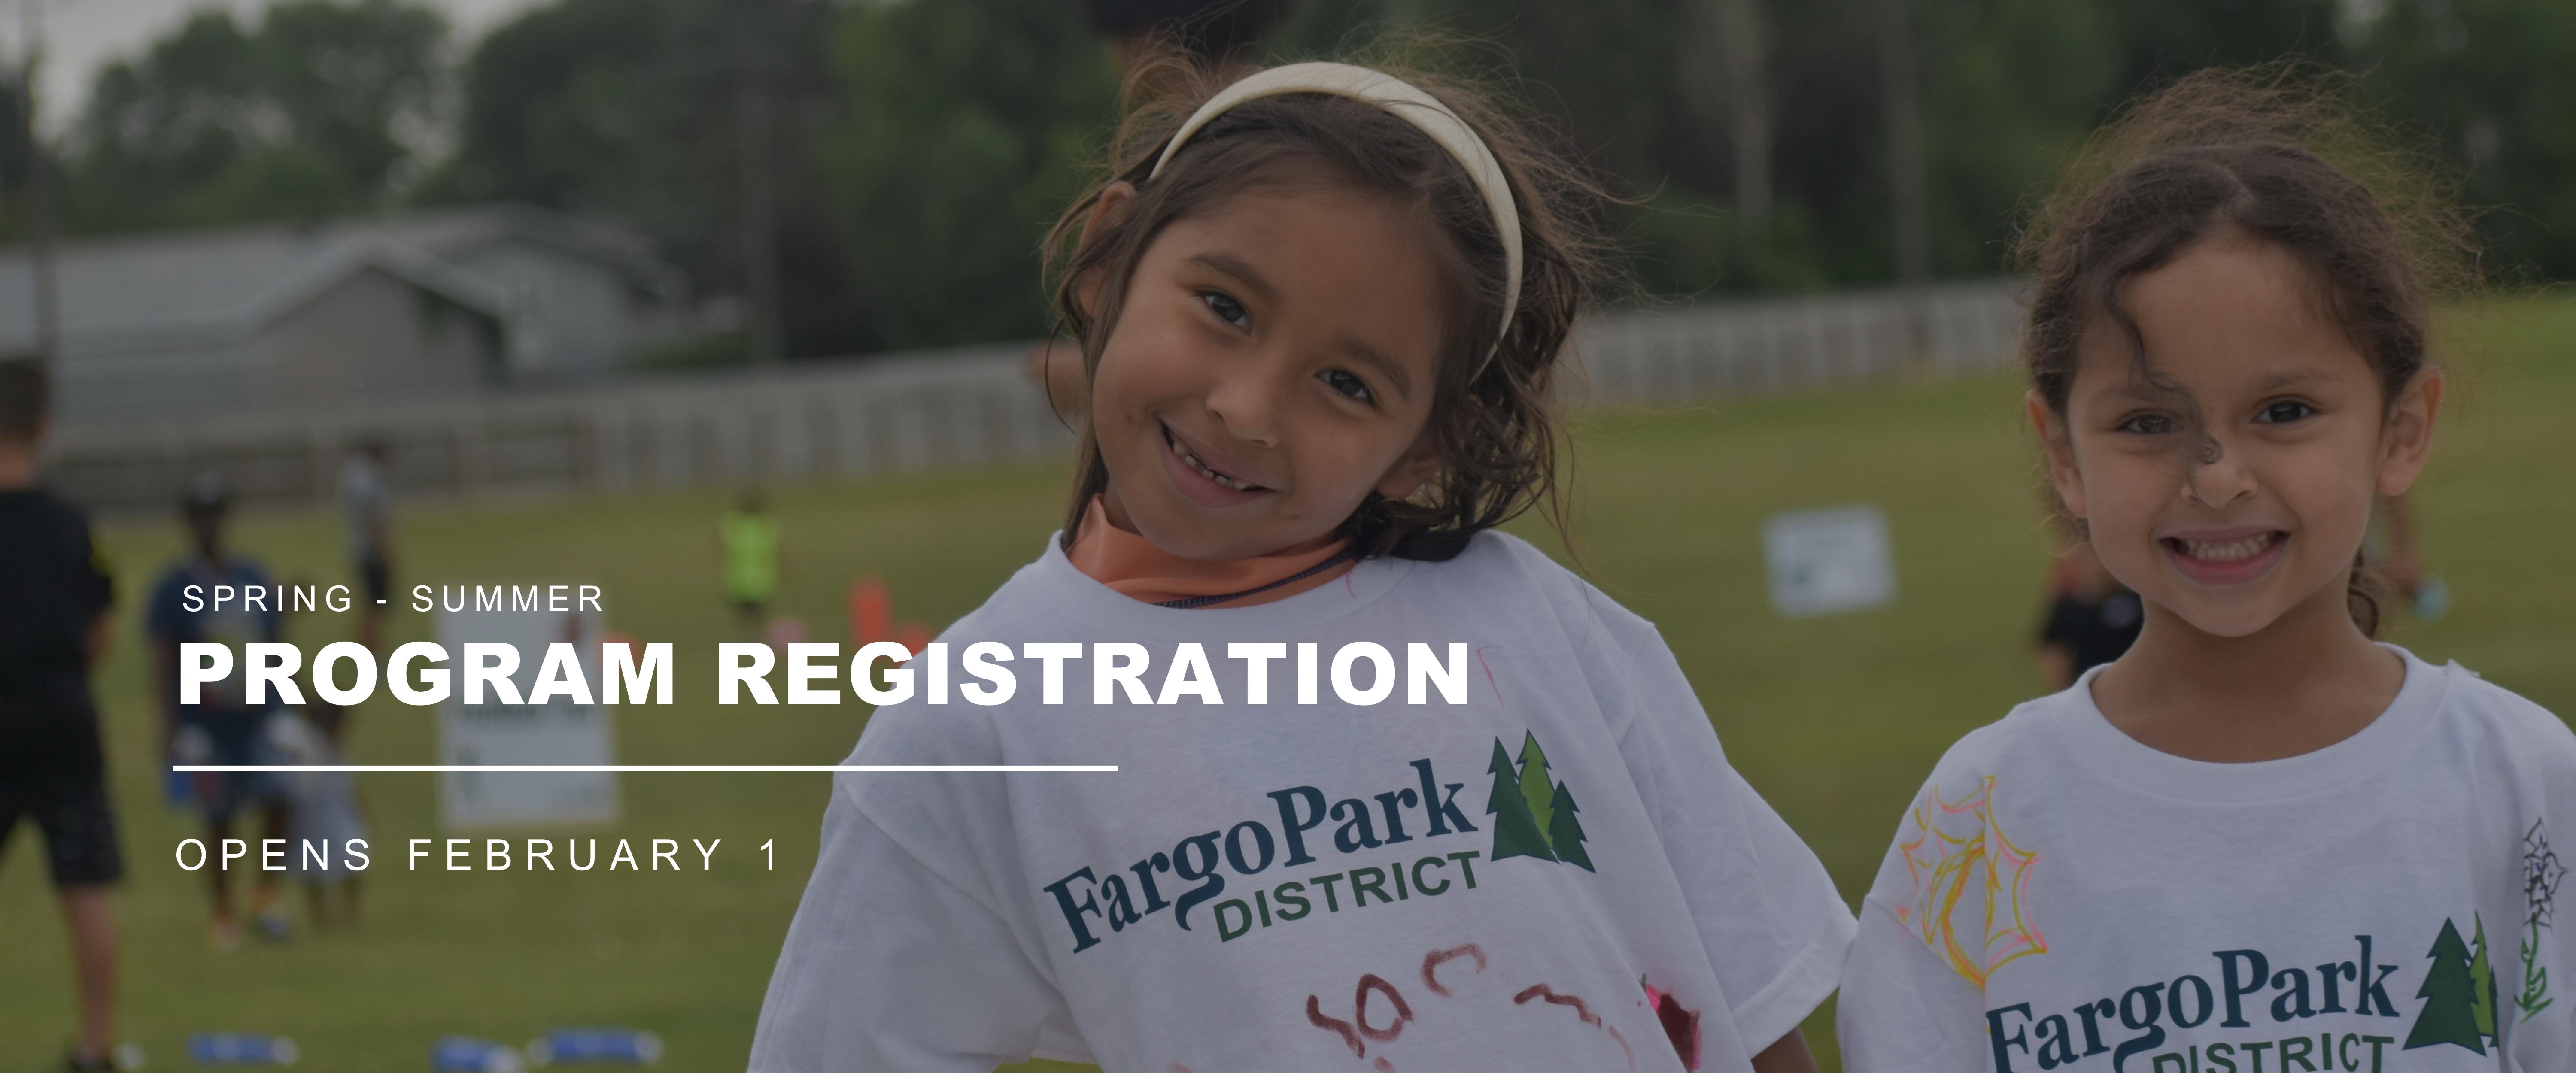 Spring-Summer Program Registration - Opens February 1 | Image of two young girls smiling wearing a Fargo Park District logoed white shirt, standing in front of kids playing soccer in the background